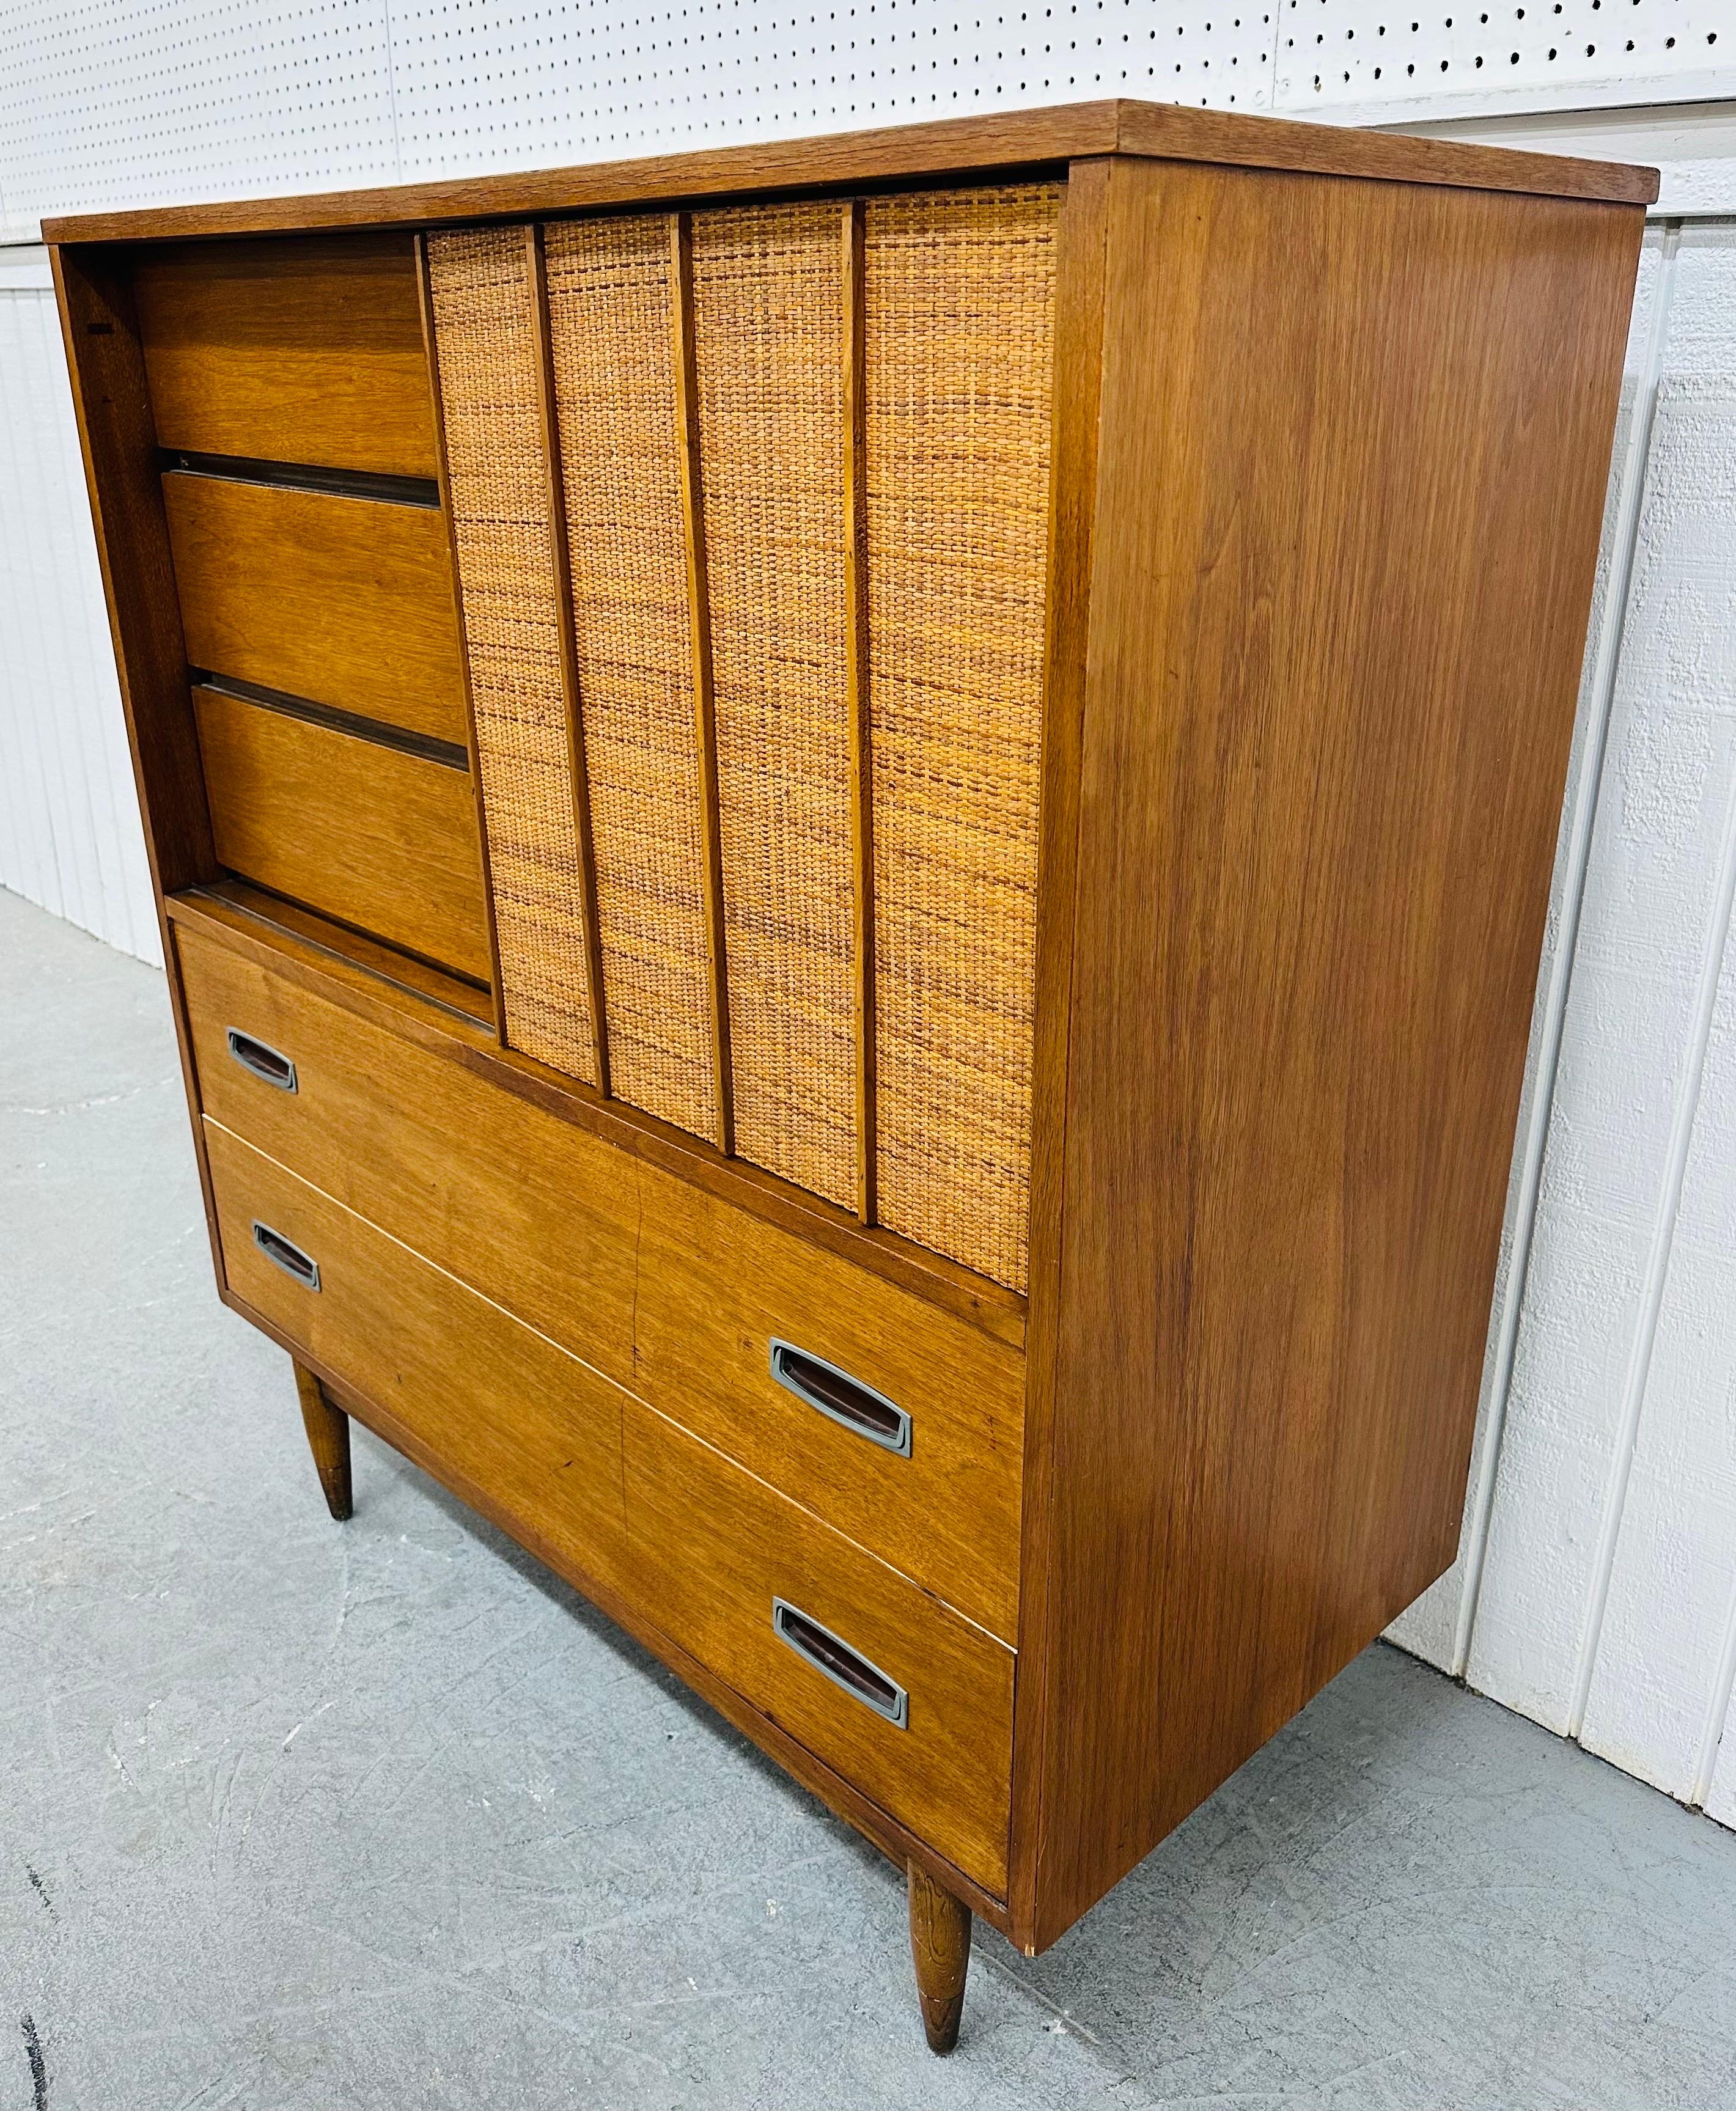 This listing is for a Mid-Century Modern Hooker Walnut & Cane High Chest. Featuring a straight line design, sliding cane door, six drawers at the top, two larger drawers at the bottom with original metal pulls, modern legs, and a beautiful walnut